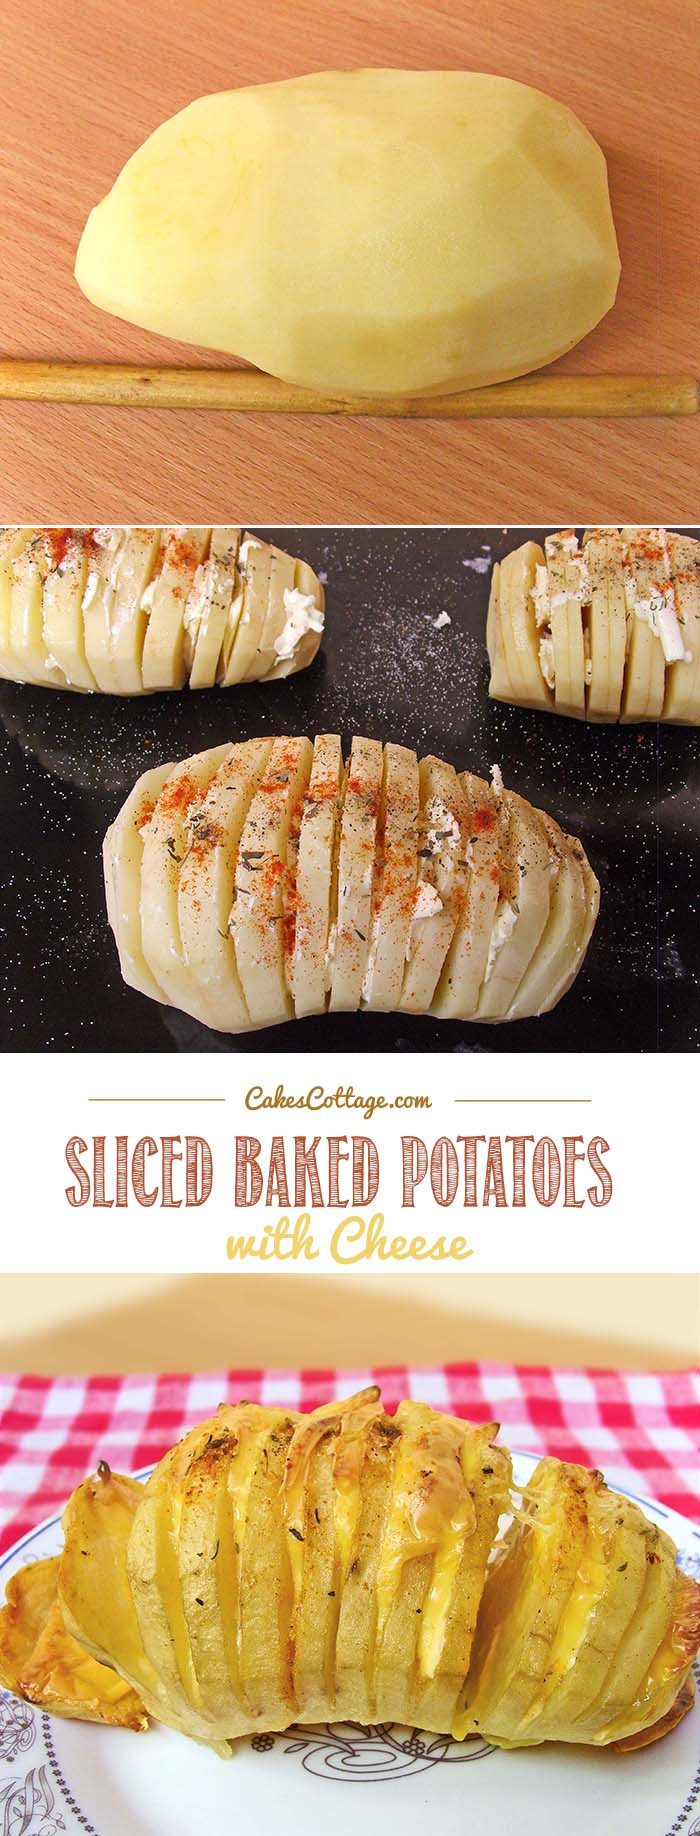 Sliced Baked Potato
 Sliced Baked Potatoes with Cheese Cakescottage